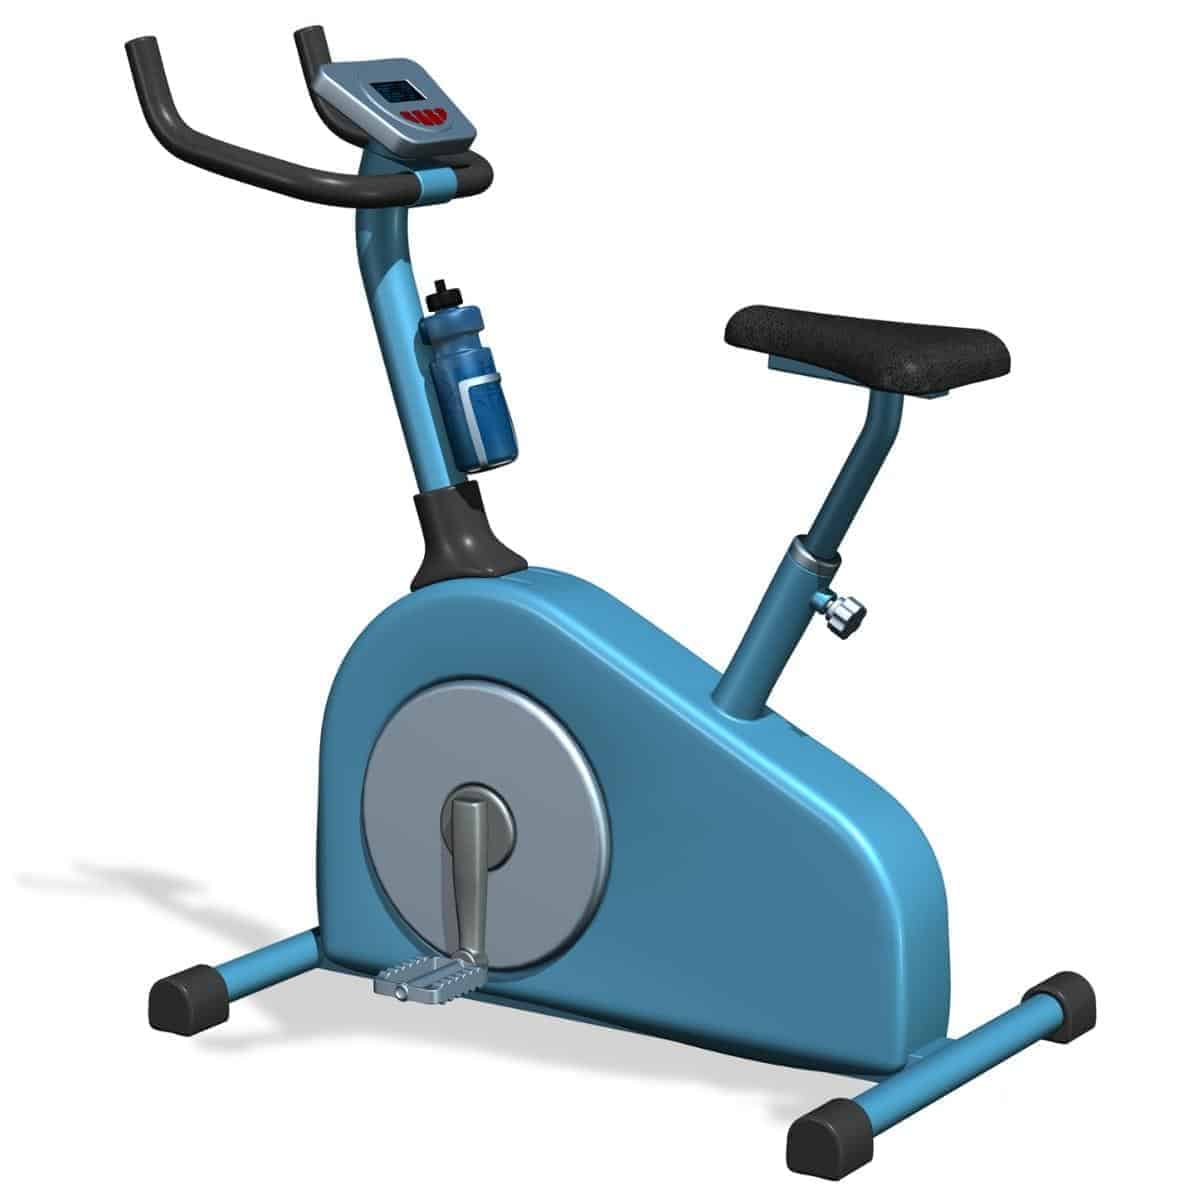 The best exercise bike for a heavy person, high weight capacity